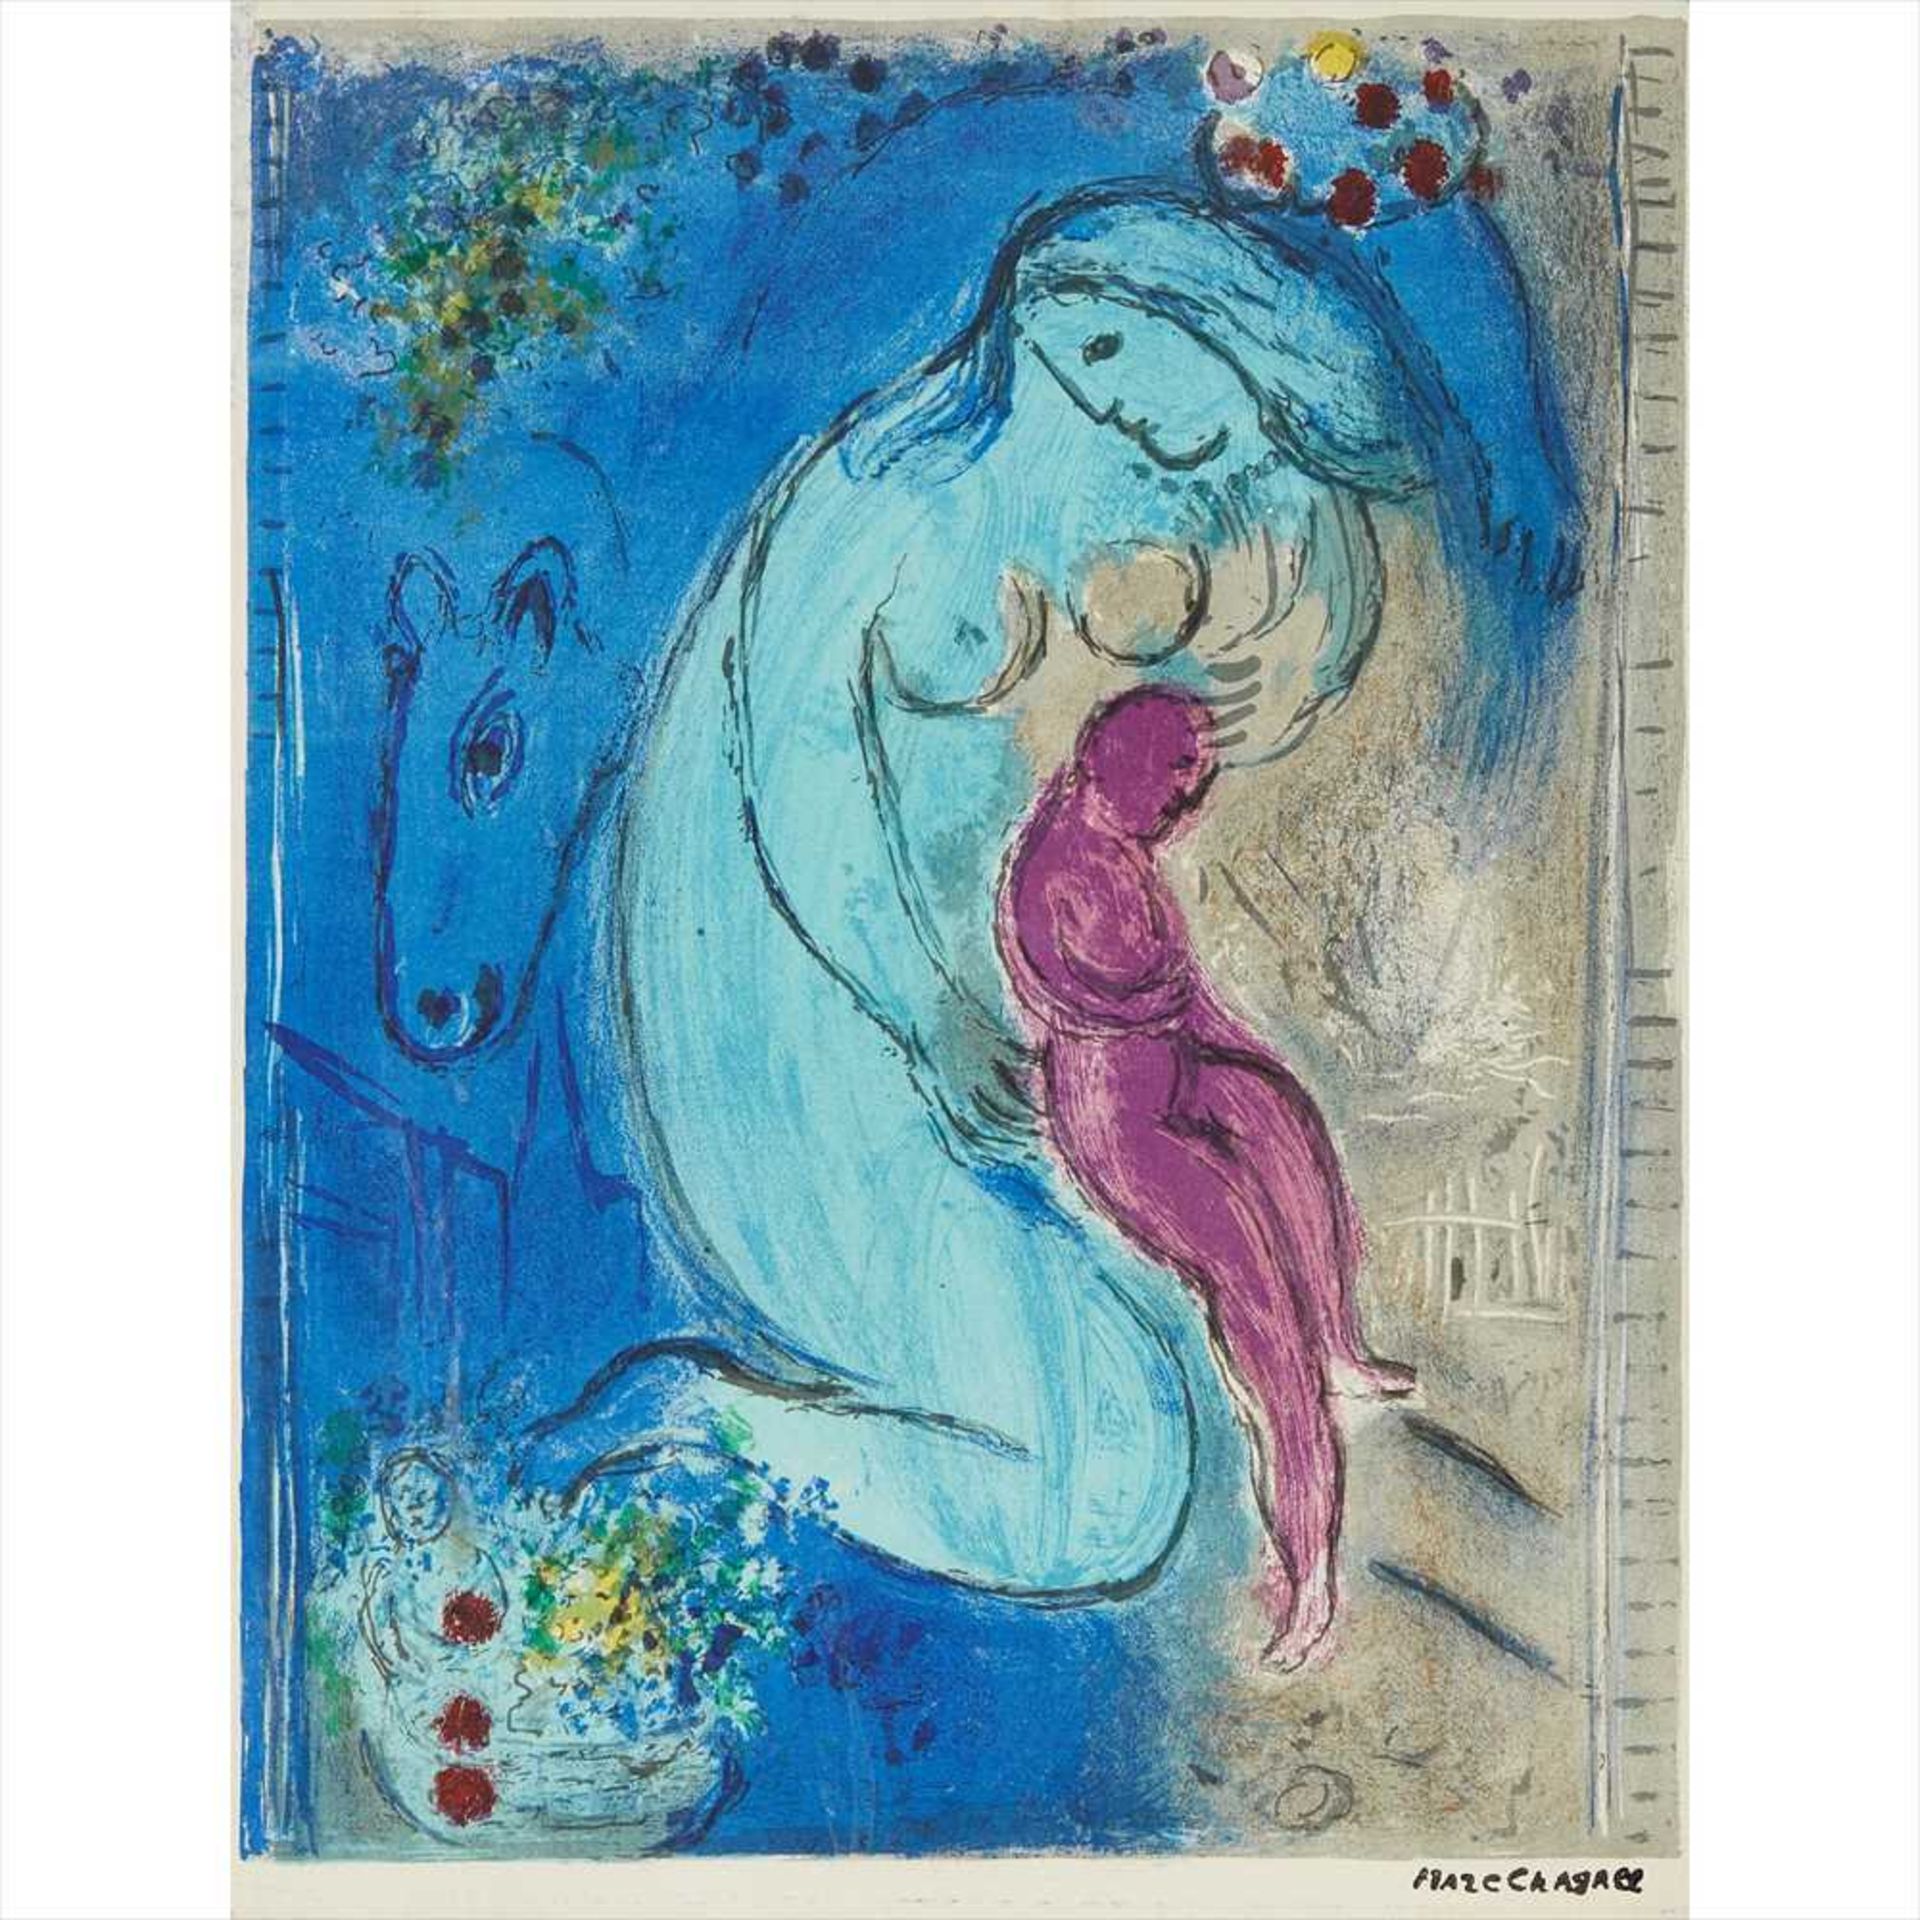 § MARC CHAGALL (RUSSIAN/FRENCH 1887-1985) QUAI AUX FLEURS Lithograph, signed in plate . (Dimensions: